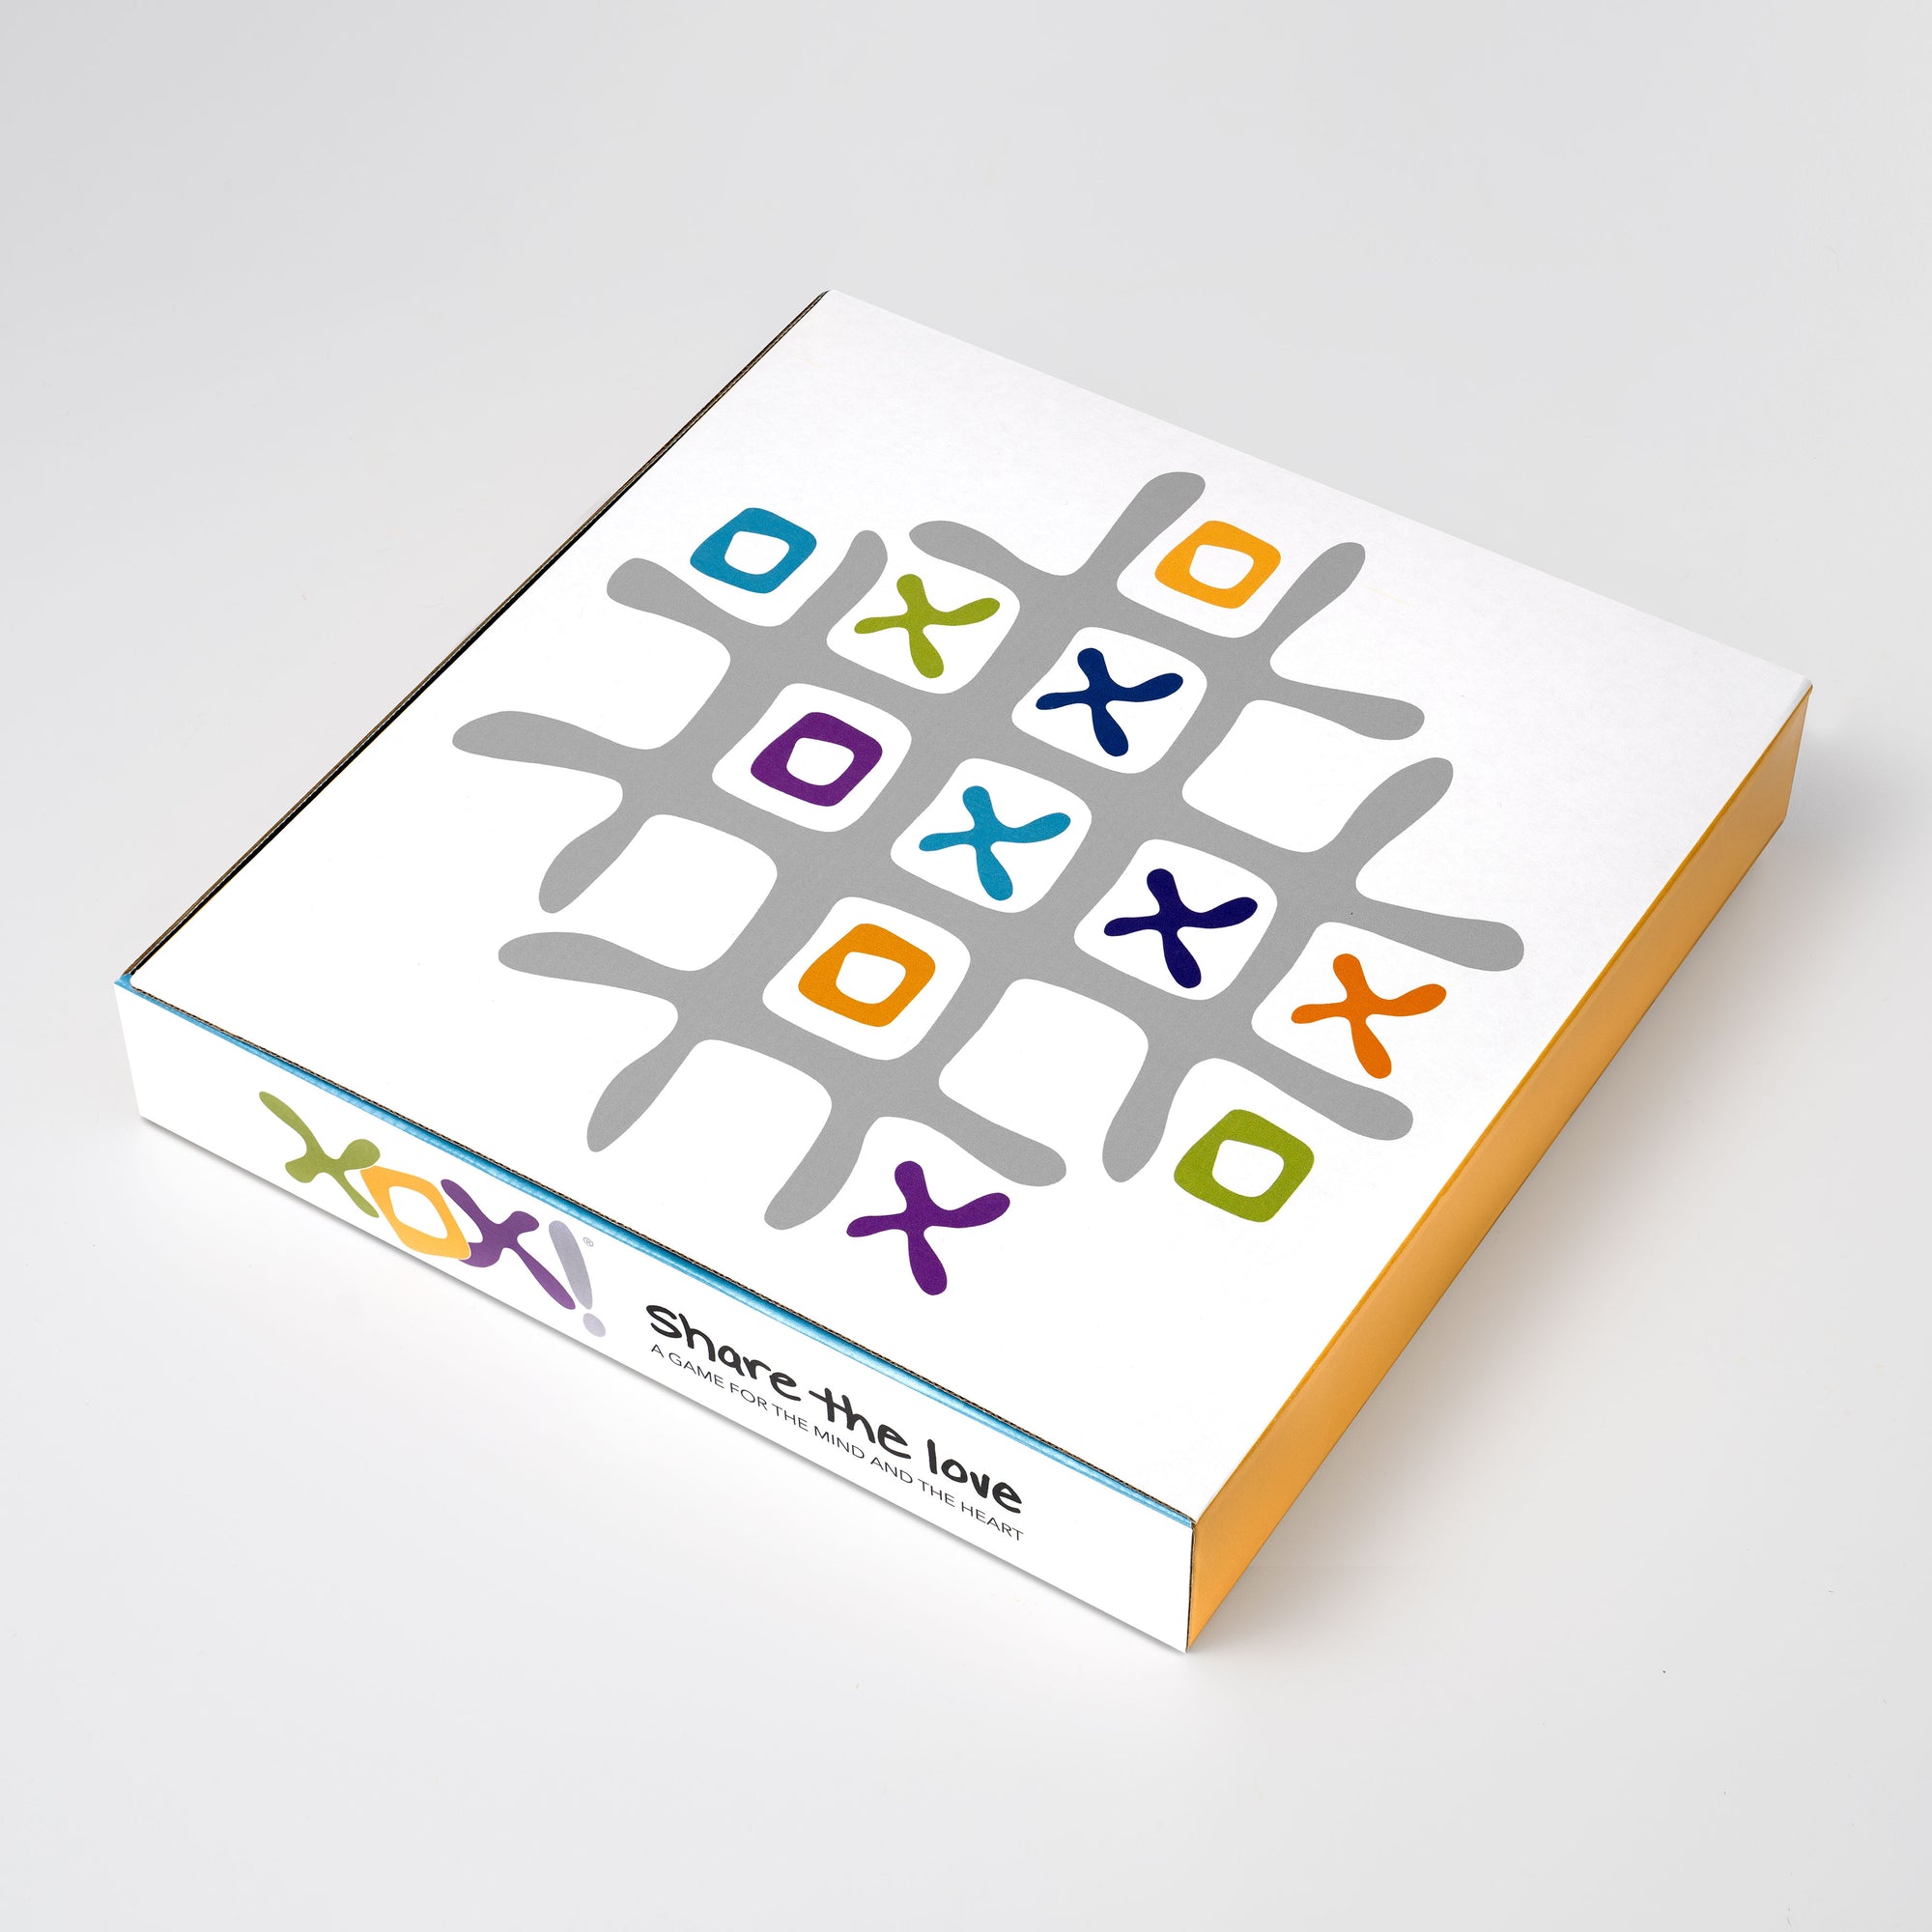 XOX! Share the Love. The fun luxury board game that doubles as art.